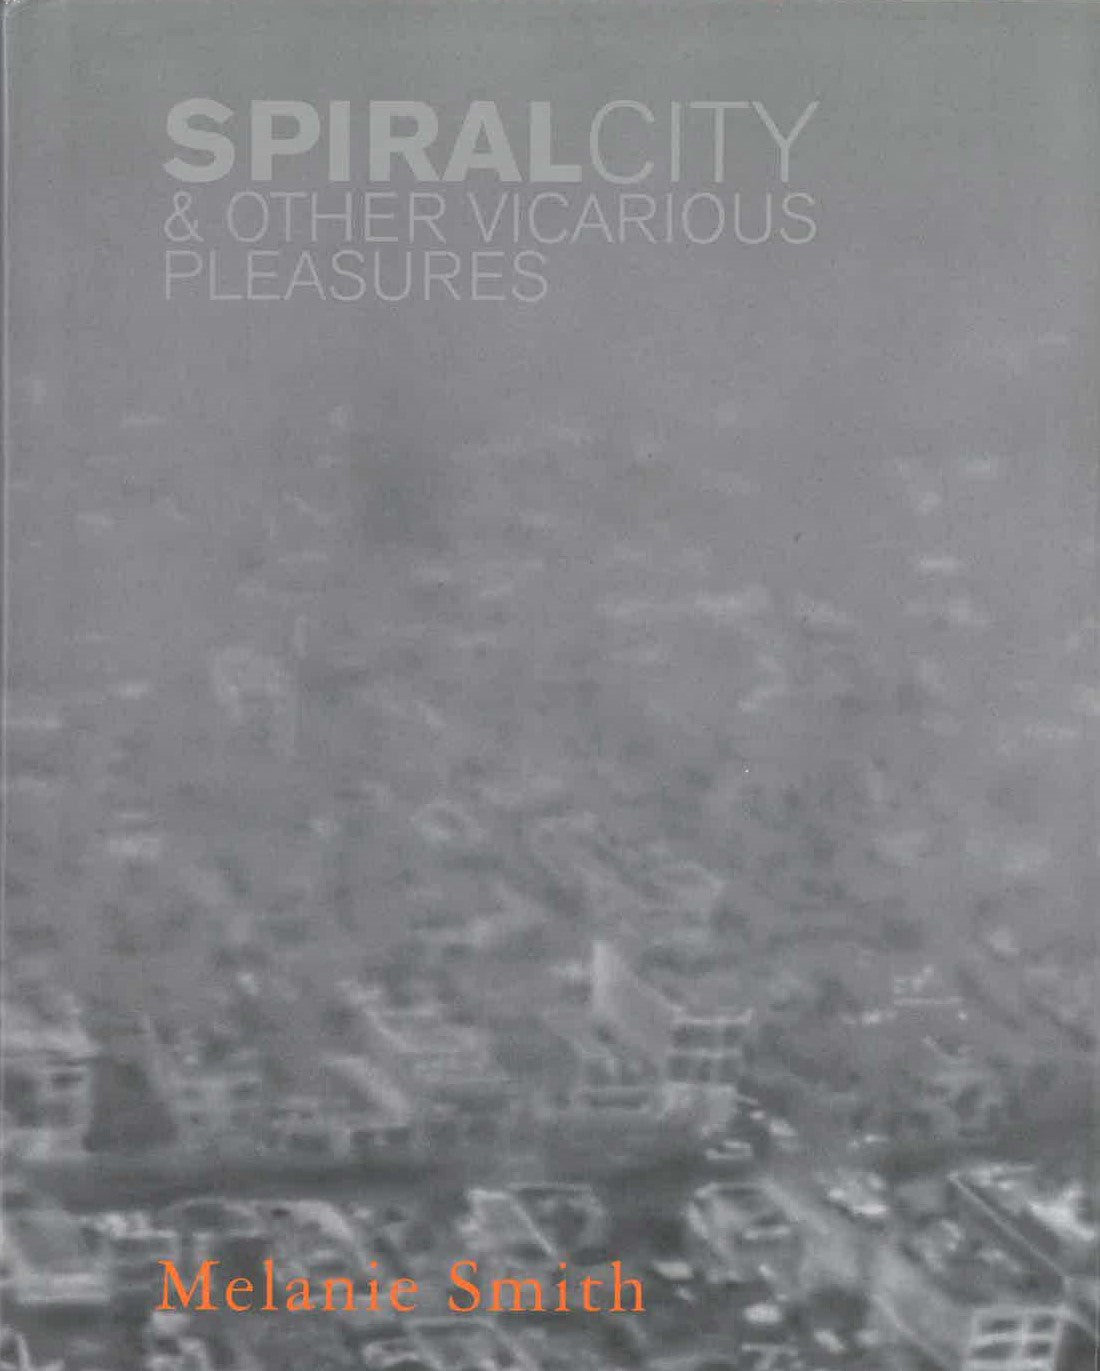 Spiral City & Other Vicarious Pleasures by Melanie Smith